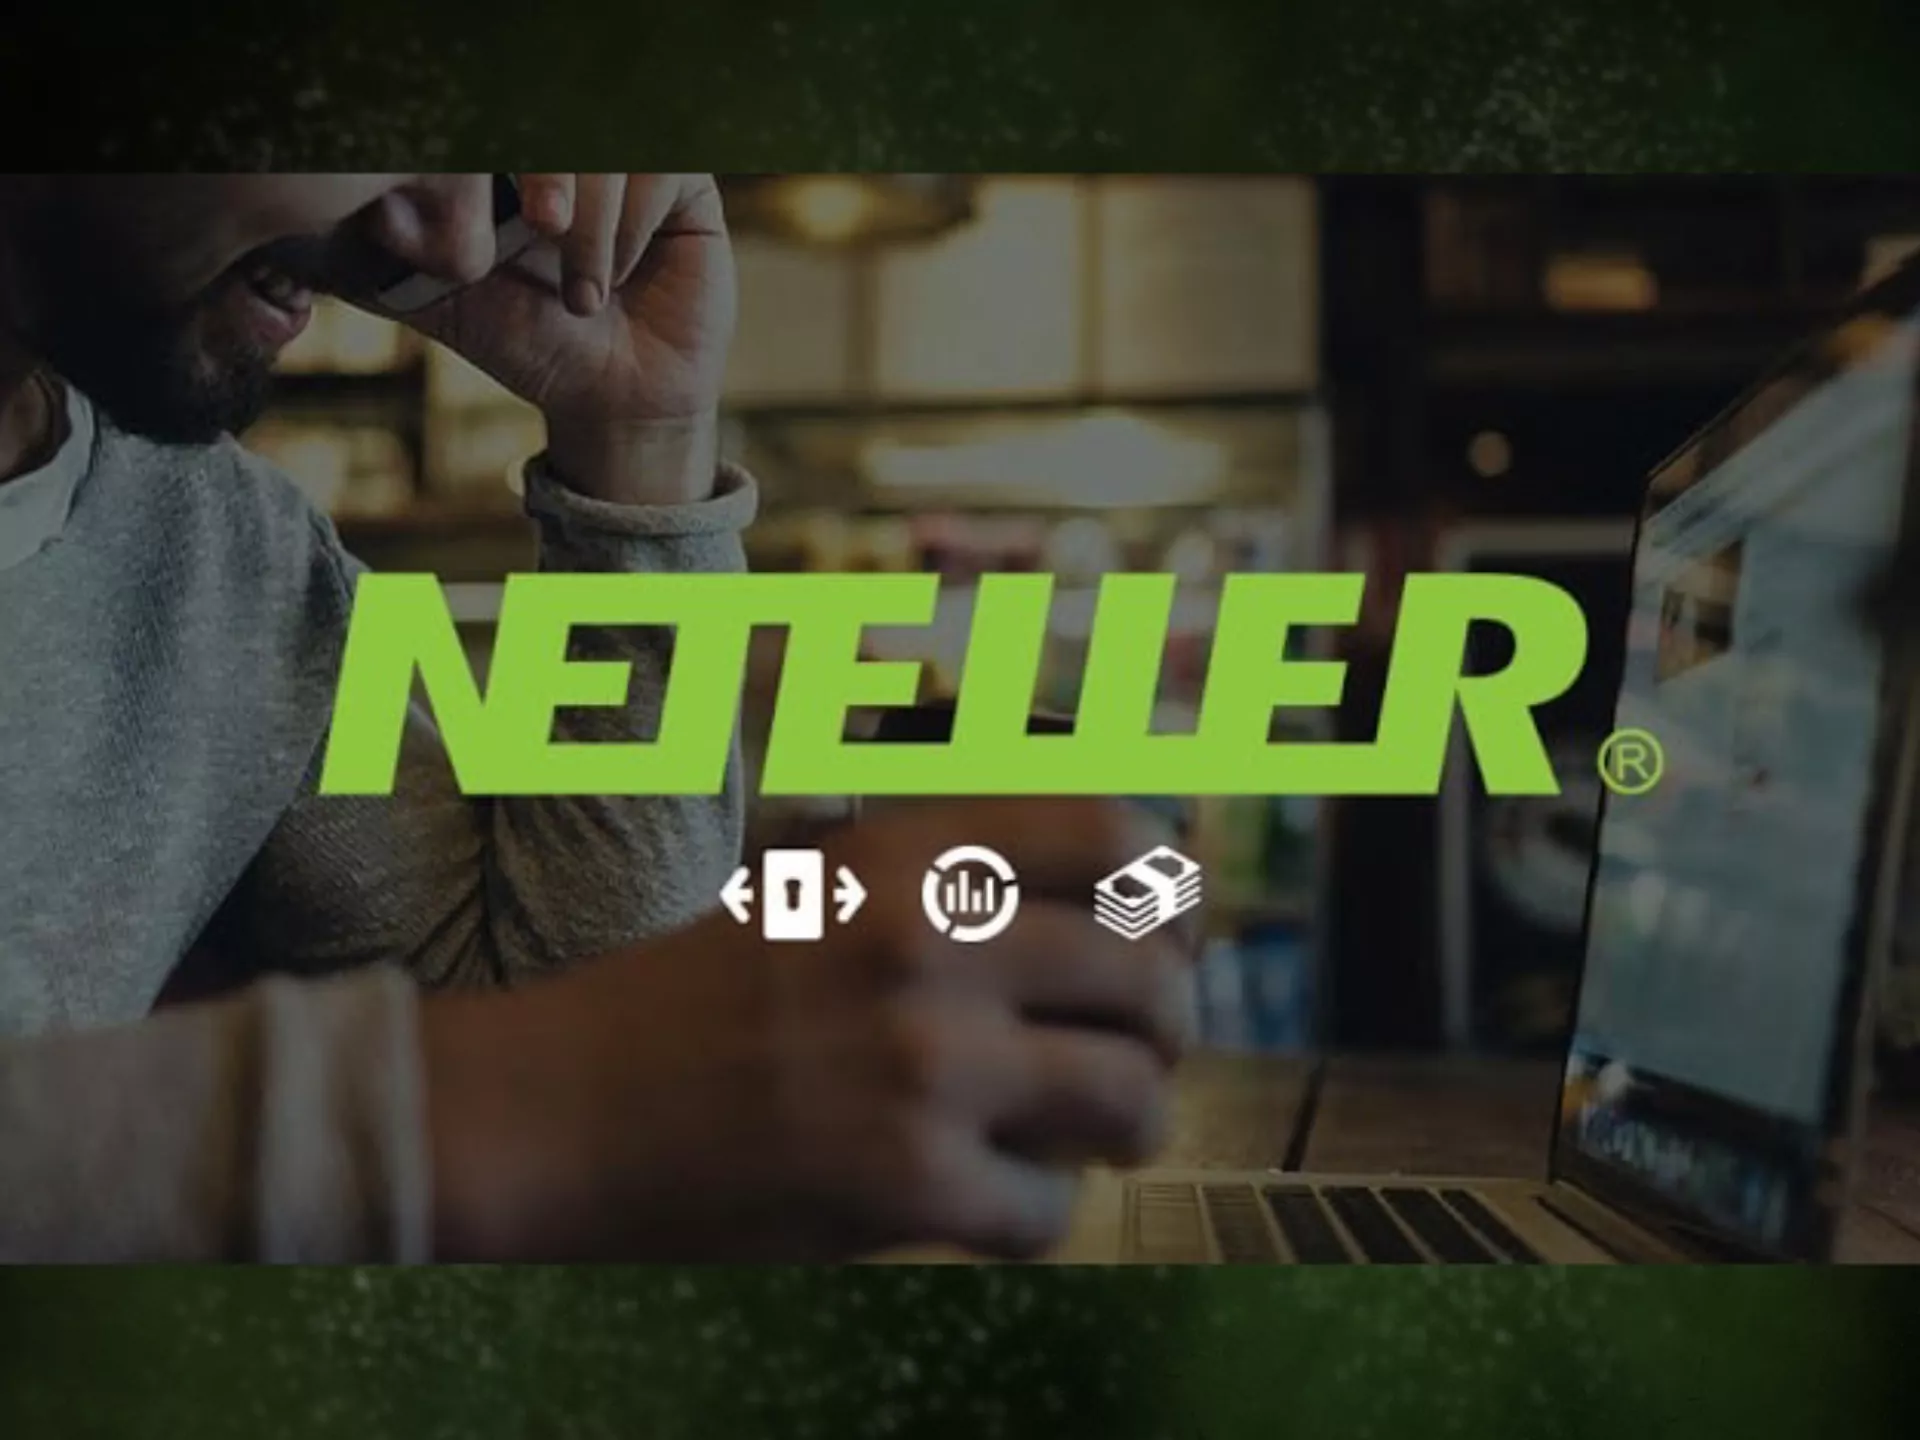 You need to sign up for Neteller if you want to use it as a payment method at an online casino.